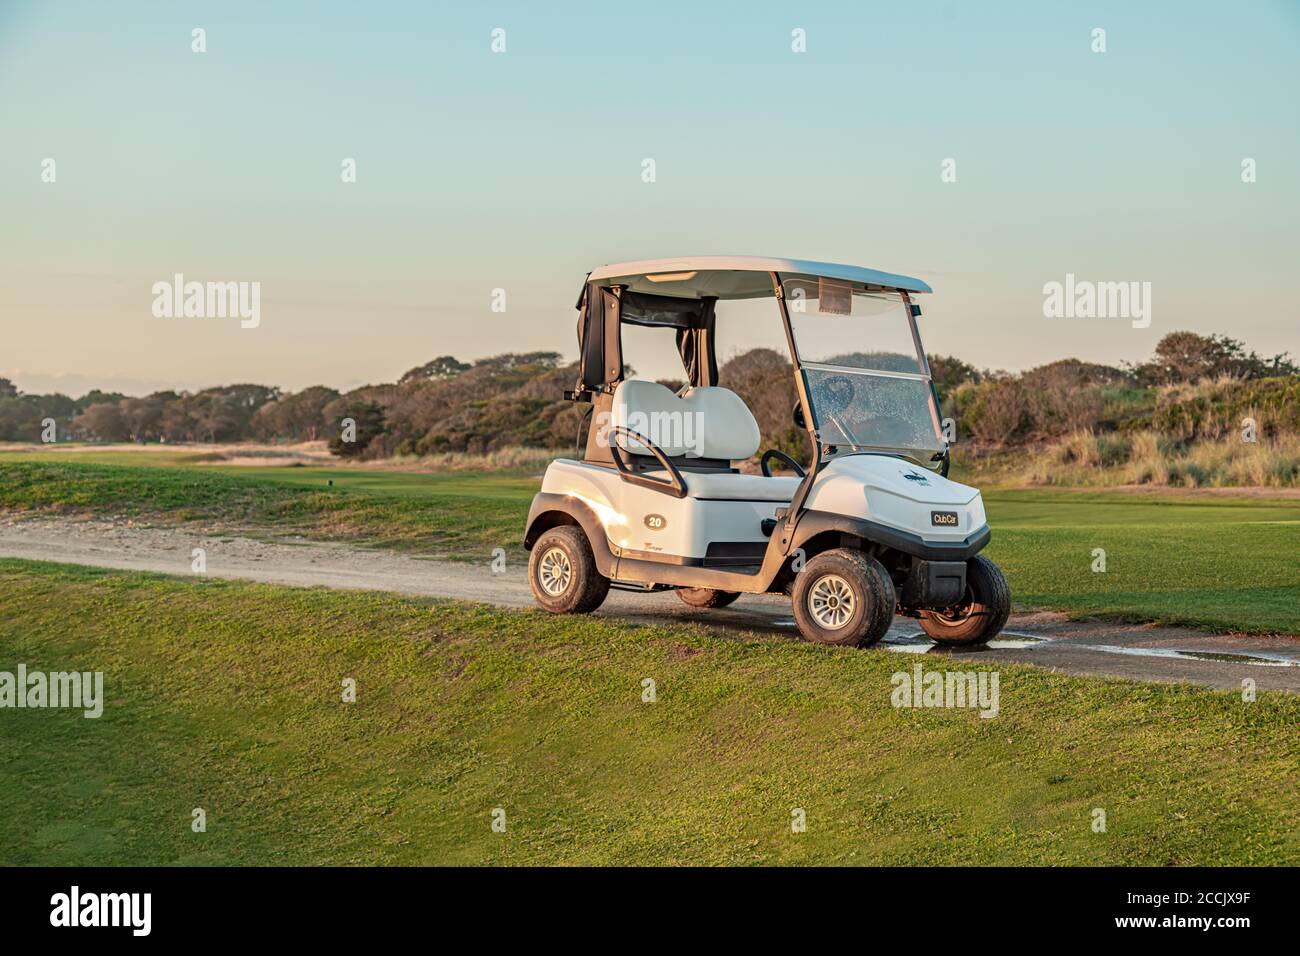 Golf cart on the MaidStone Country Club golf course Stock Photo